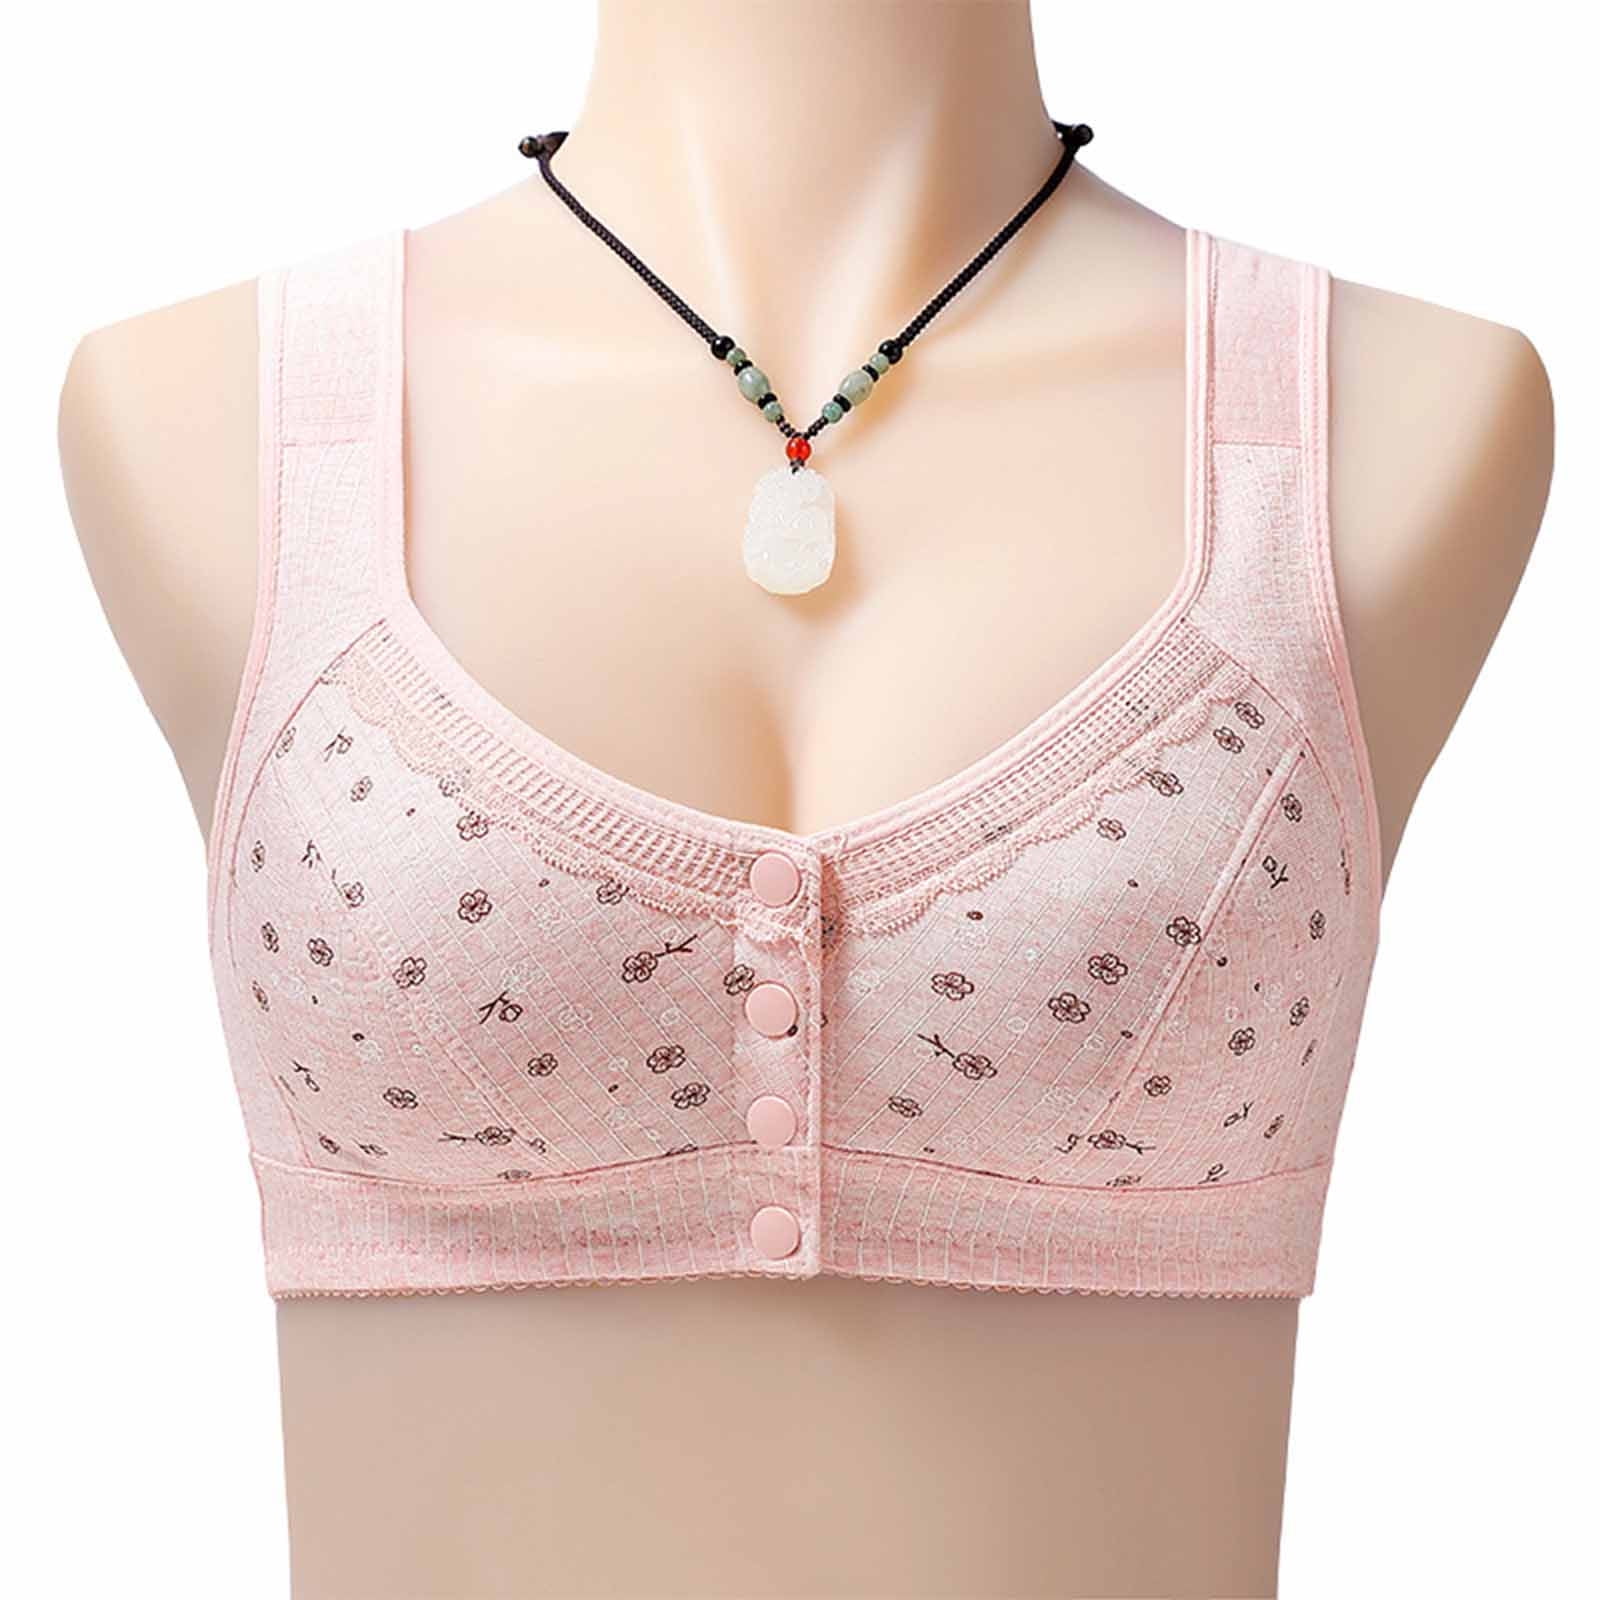 uublik Push Up Bras for Women Soft Wirefree Push Up Underoutfit Bra Pink 